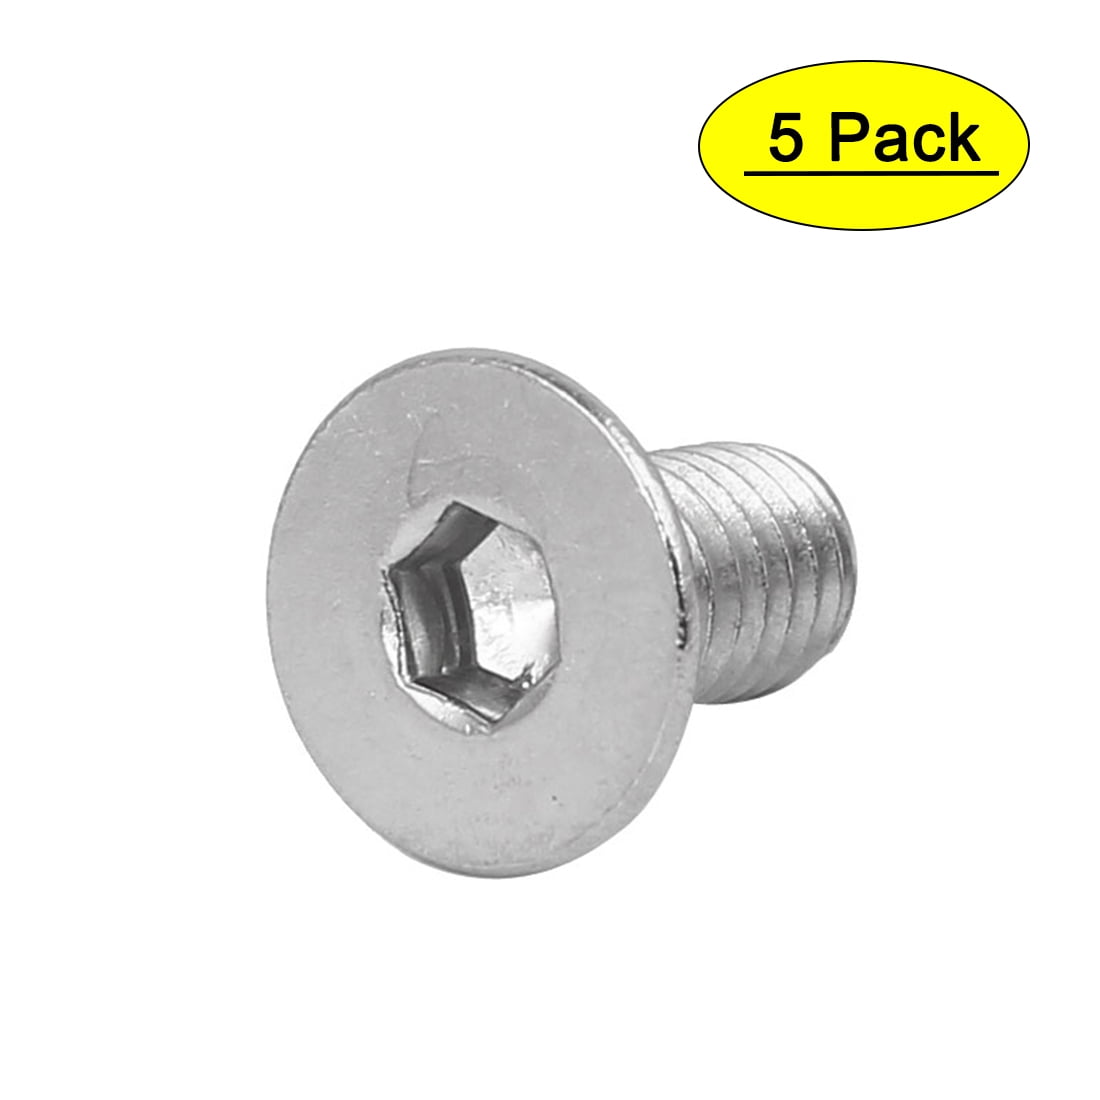 310 Bicycle Bike Bolts Kit Stainless Steel Allen Screws and Chain Wear Indicator